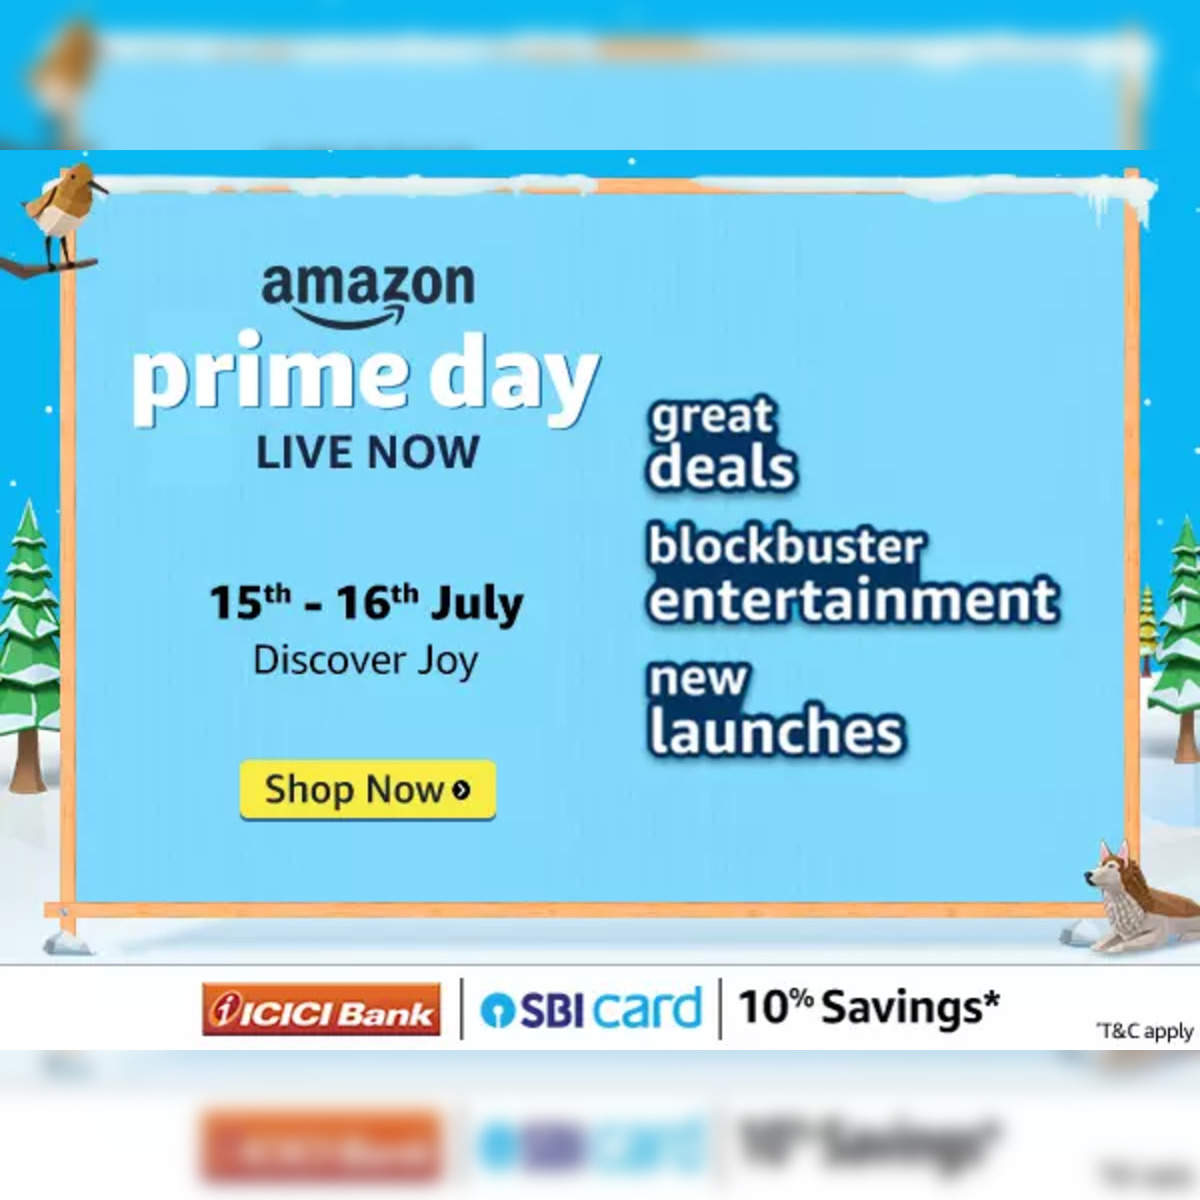 Prime Day 2020 sale begins today: Here are the top deals